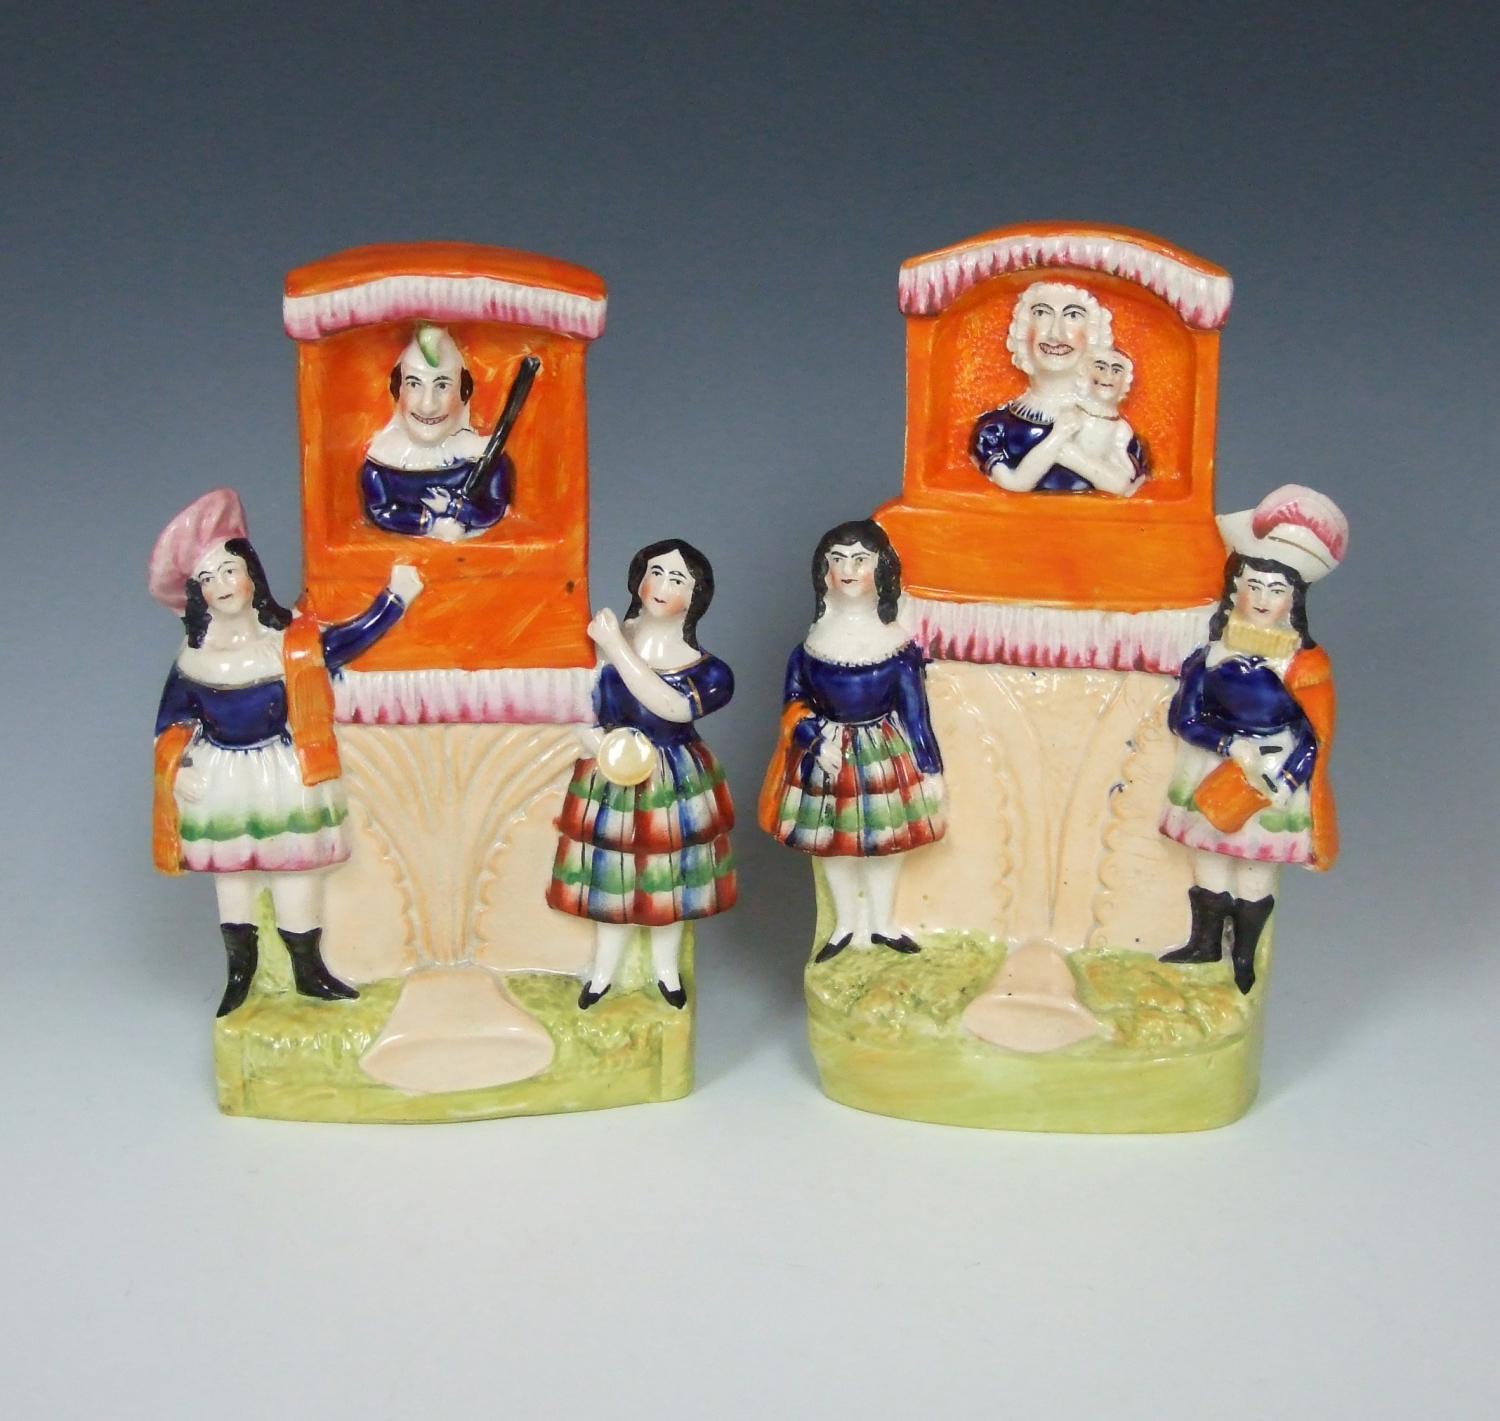 Rare Staffordshire Punch & Judy booth figures